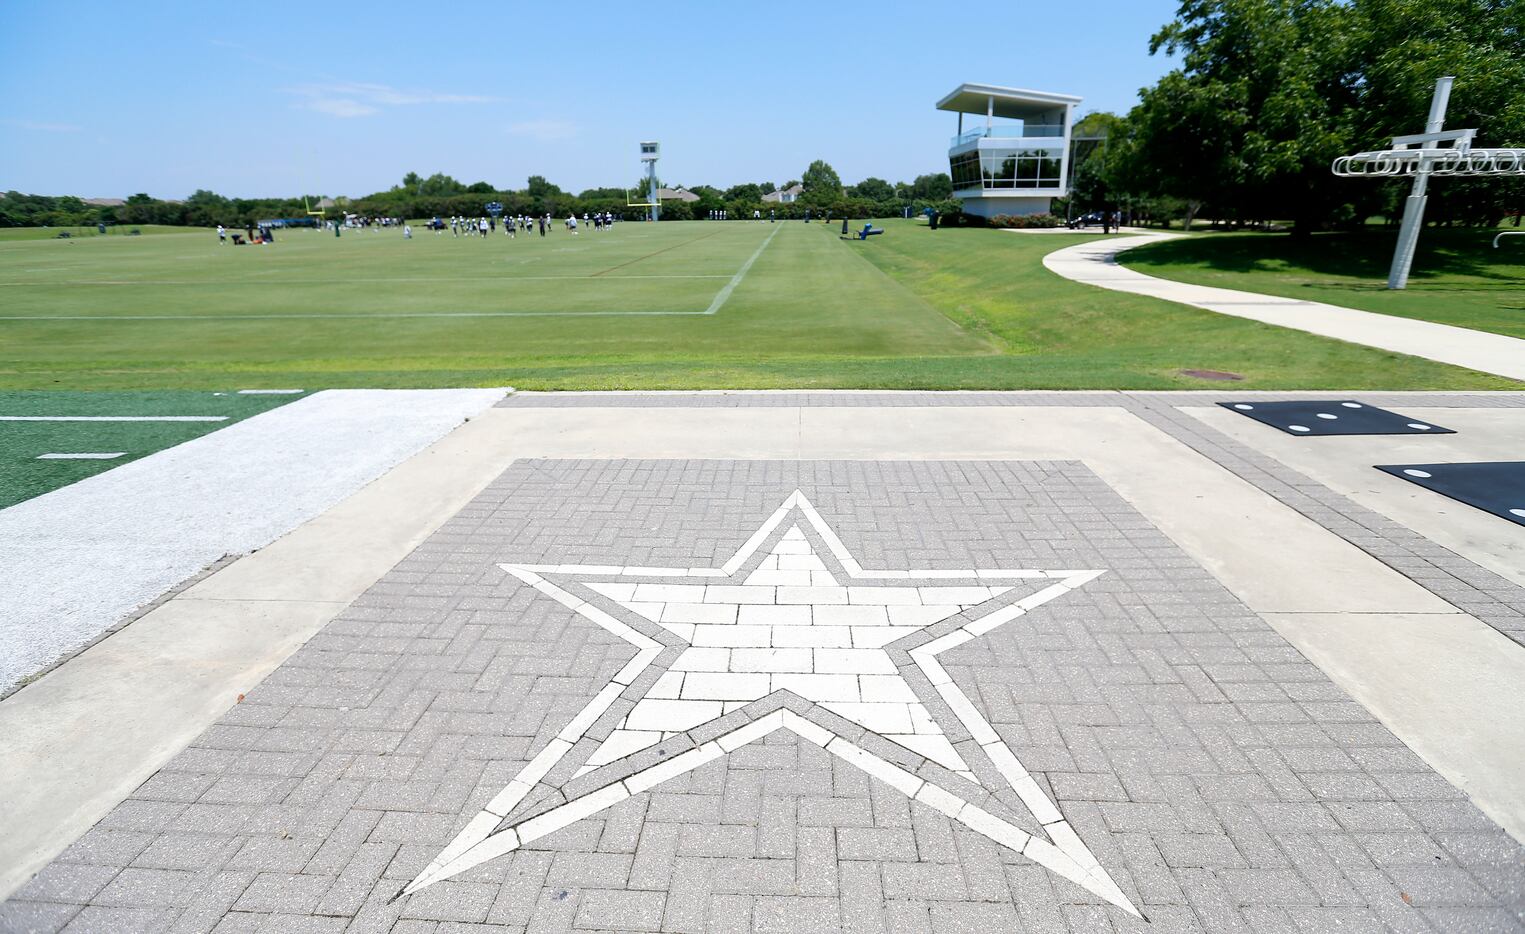  Dallas Cowboys Valley Ranch former practice facility in Irving will be replaced with a home...